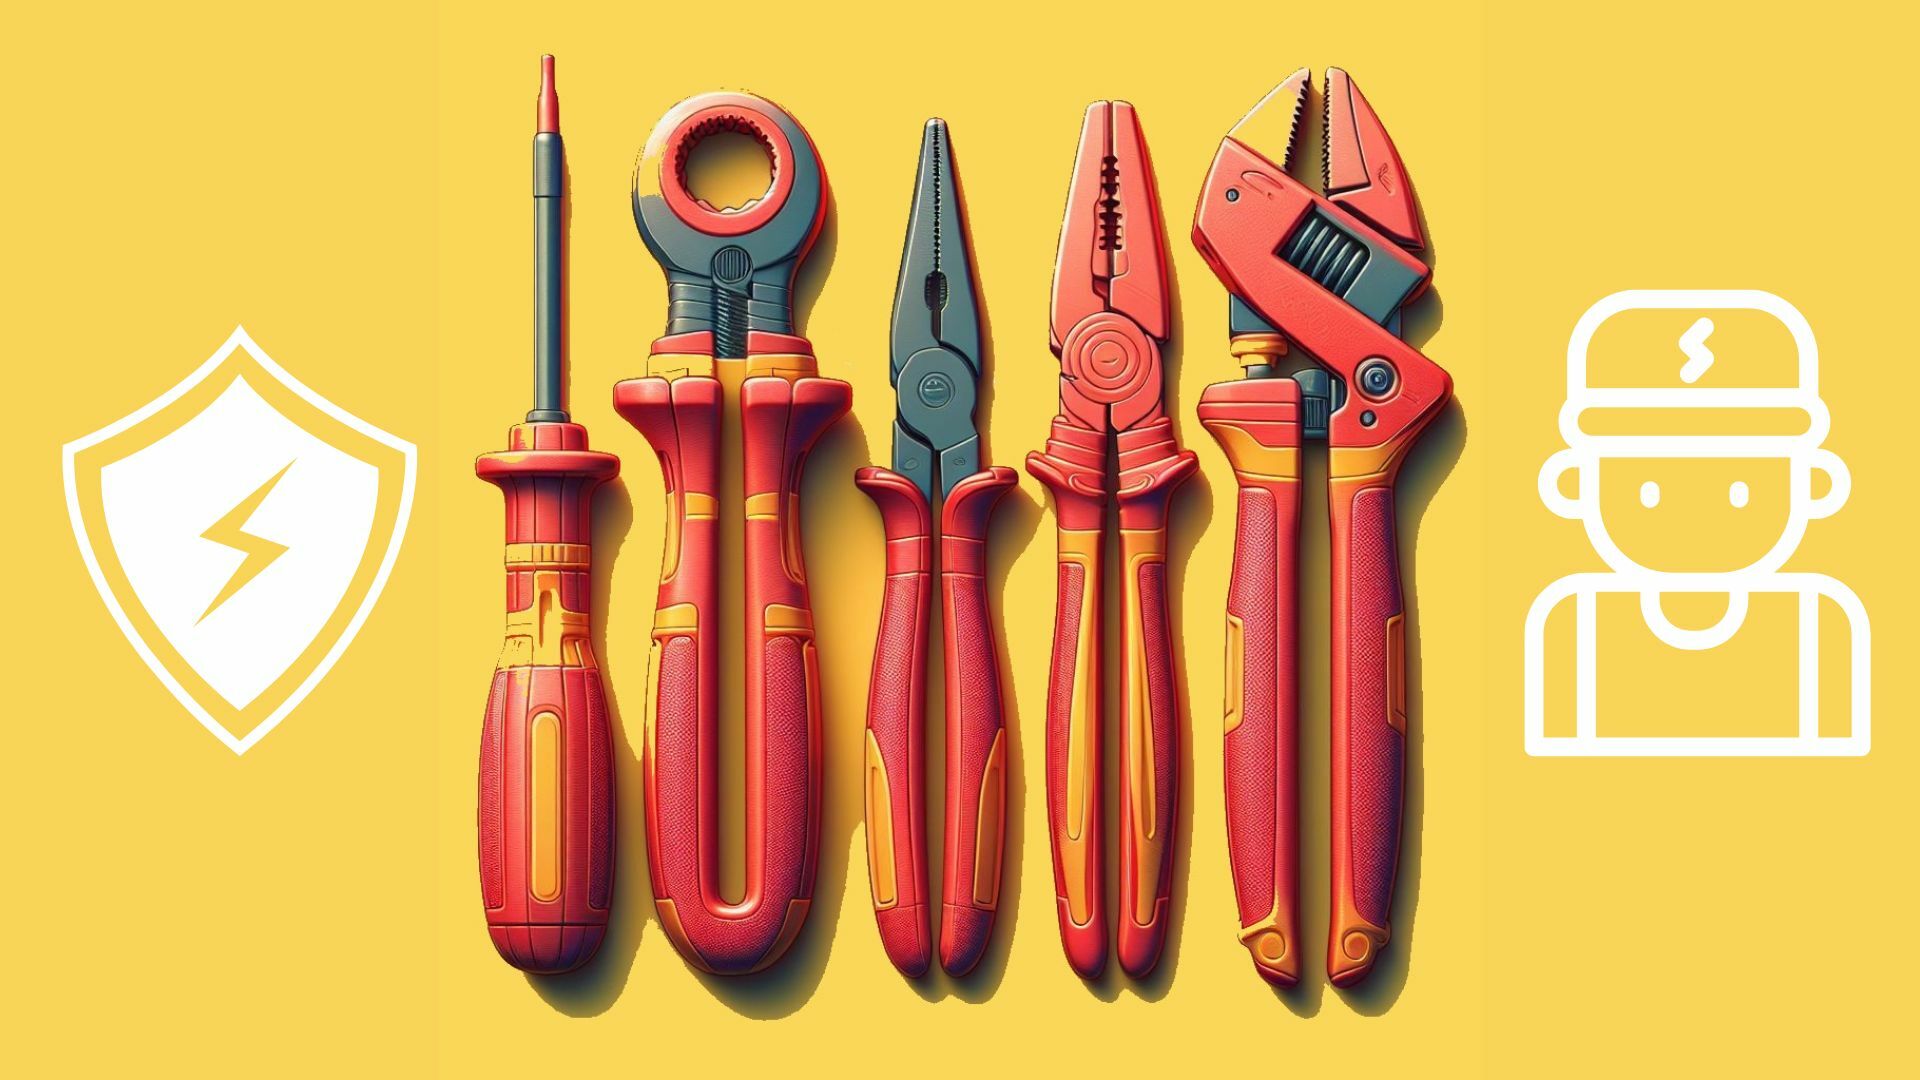 4 Must-Have Insulated Hand Tools screwdrivers pliers cutters and wrenches